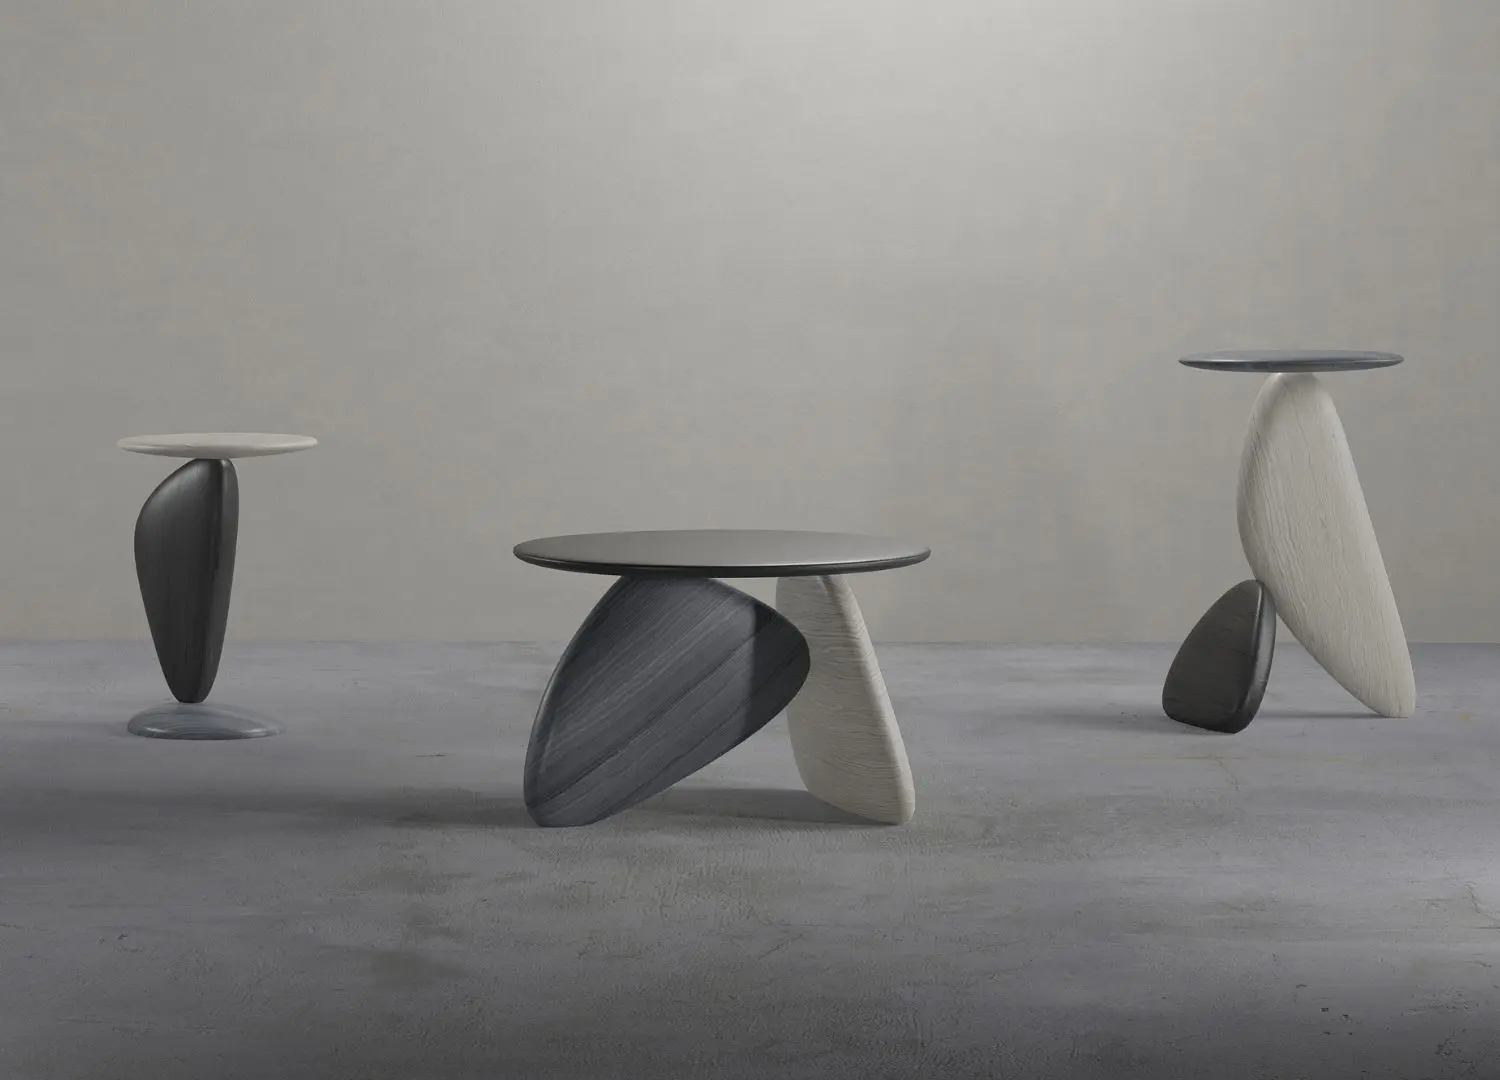 Slow by Maximilian Beck - pebble furniture and lighting